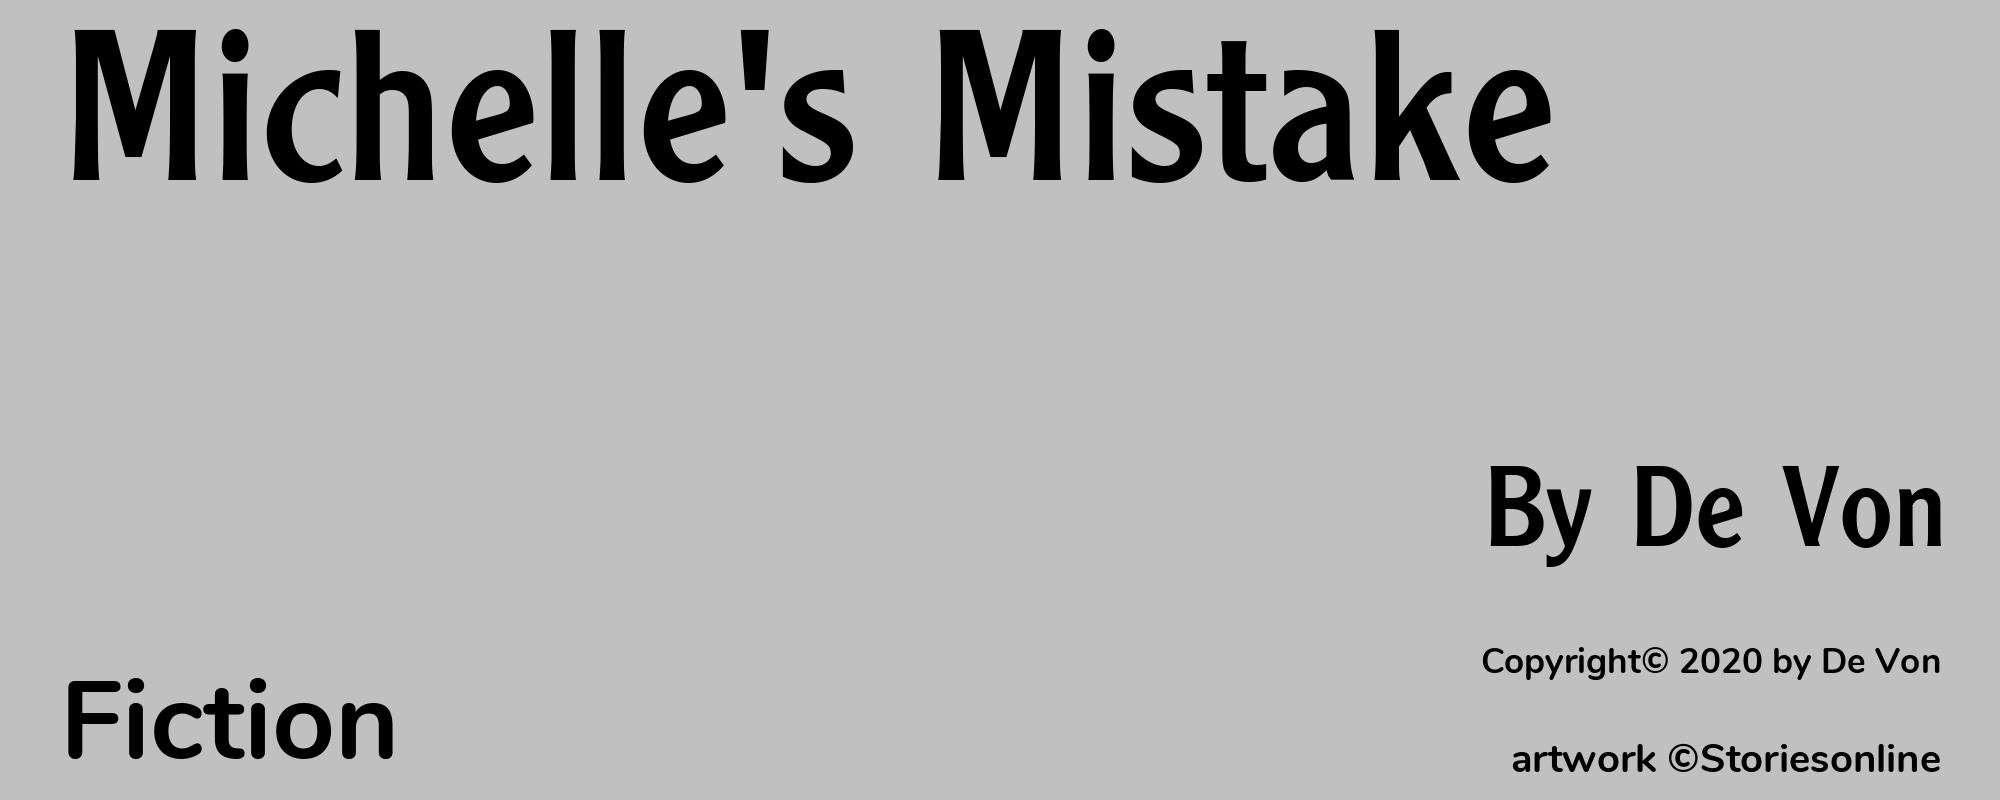 Michelle's Mistake - Cover